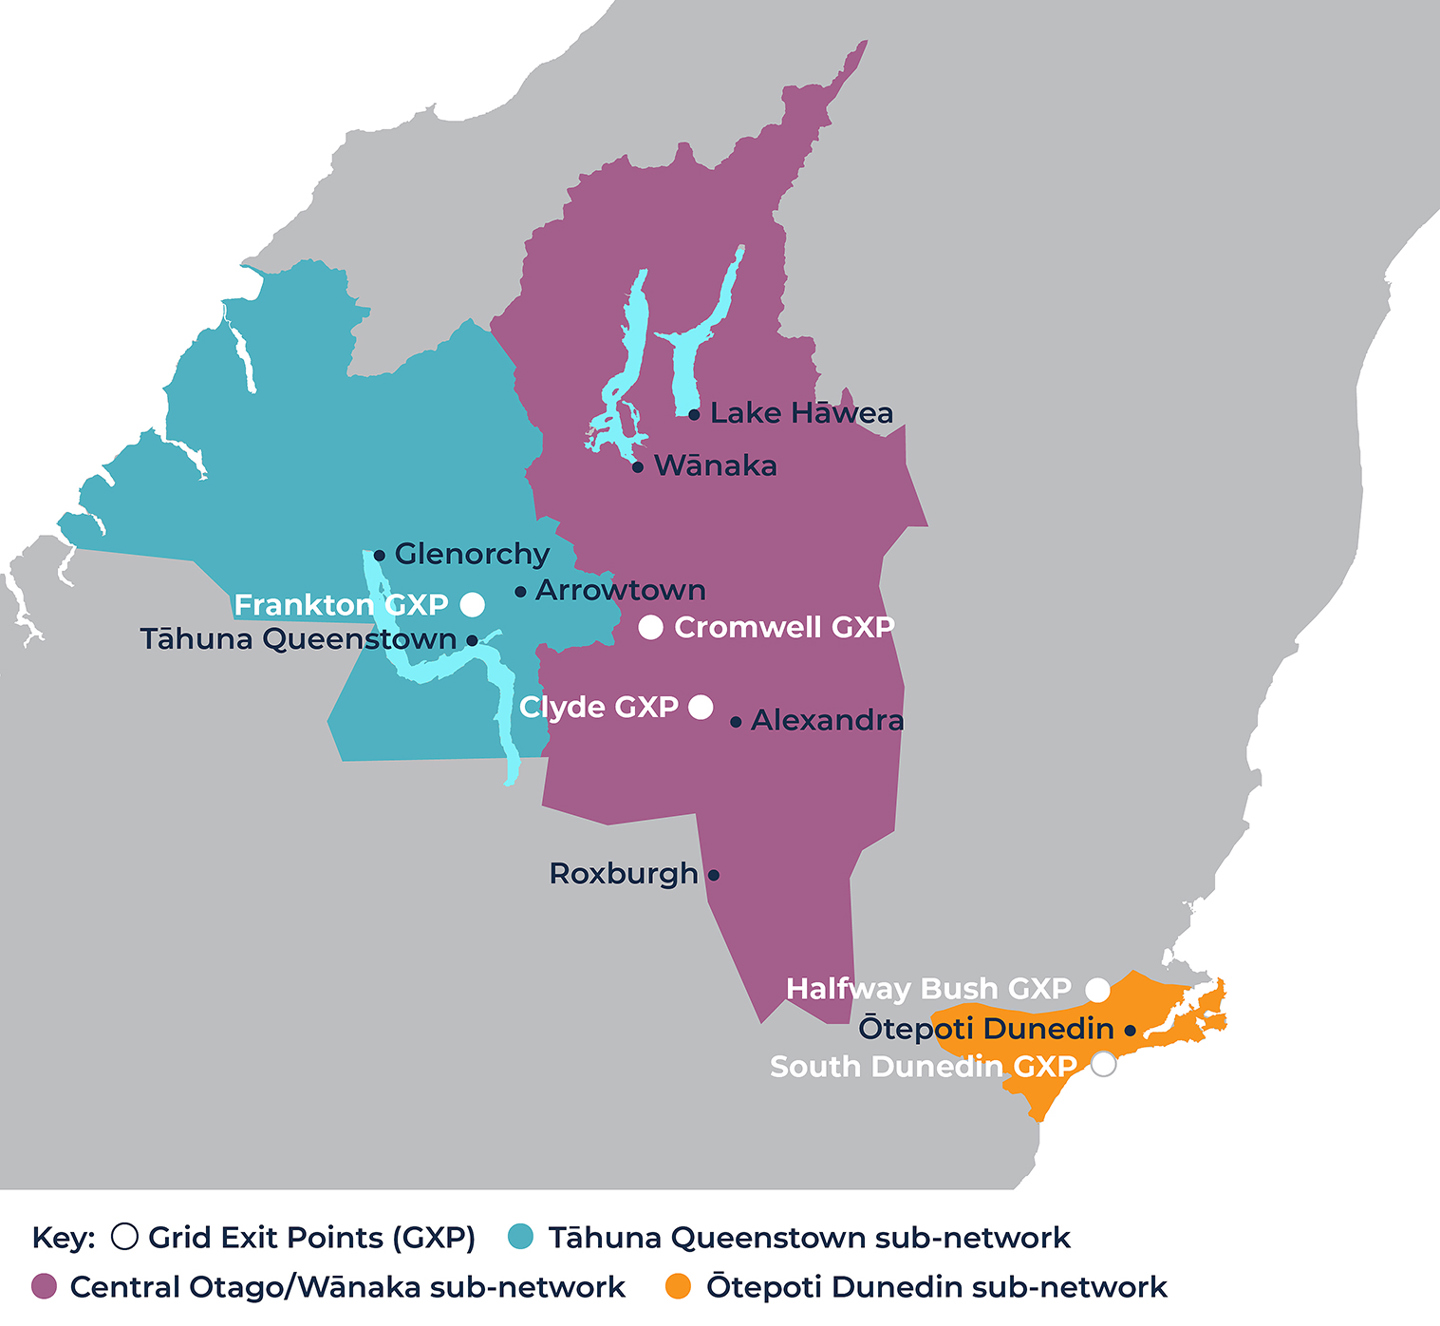 Graphic that shows the a map of the Aurora Energy Network in Otepoti Dunedin, Central Otago/Wanaka and Tahuna Queenstown.